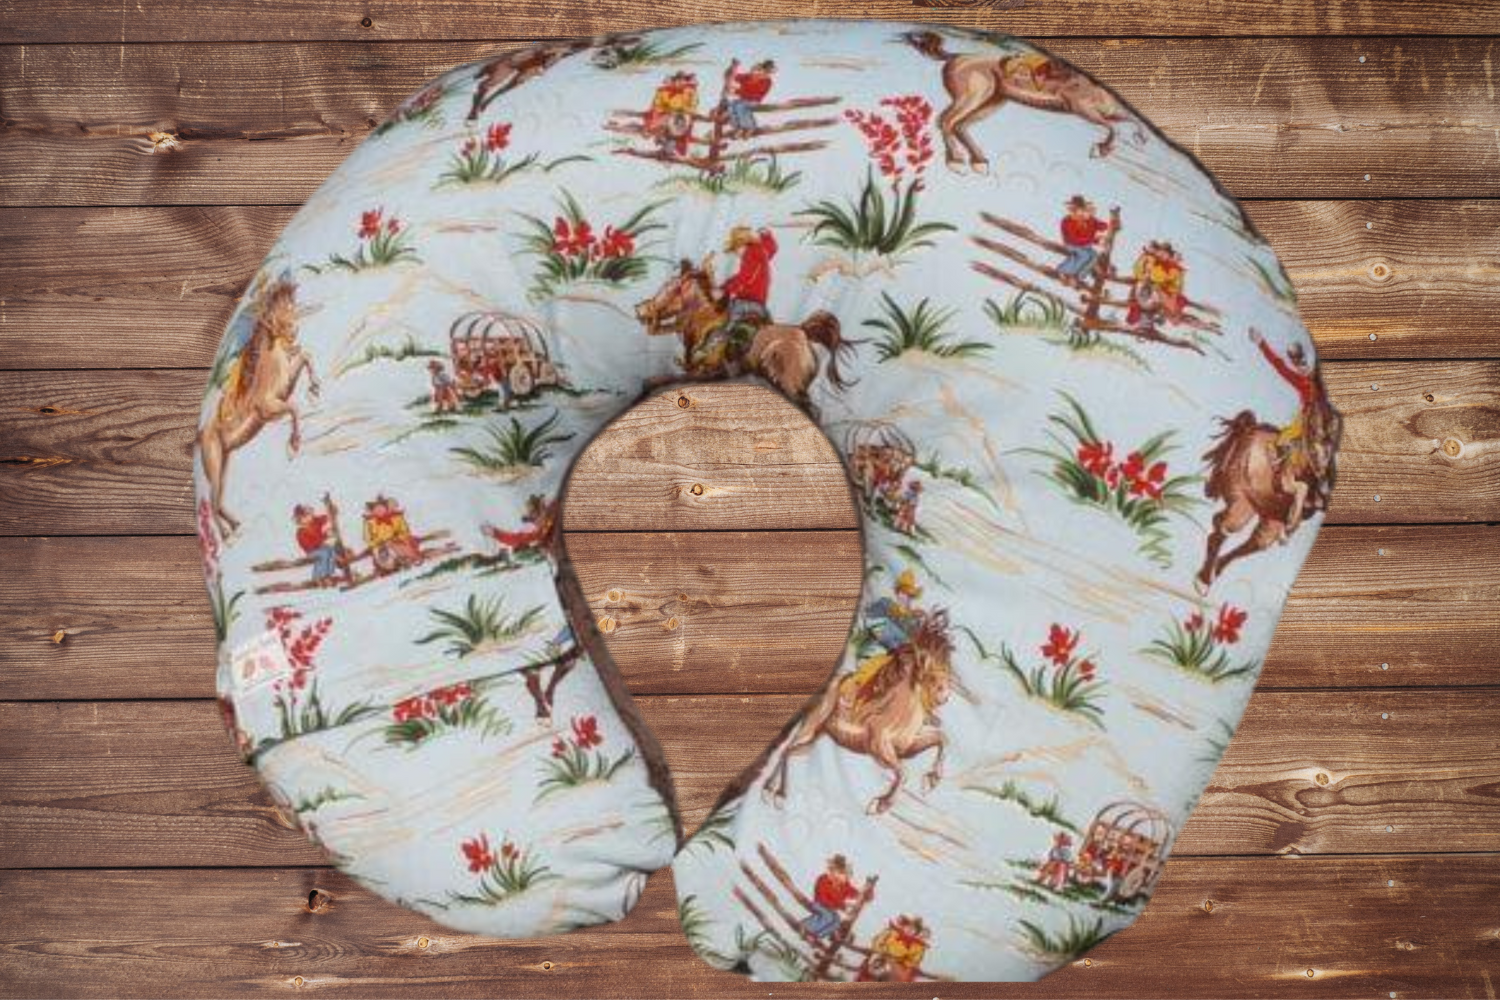 Nursing Pillow Cover - Barn Dandy Cowboy and Brown Minky Western Cover